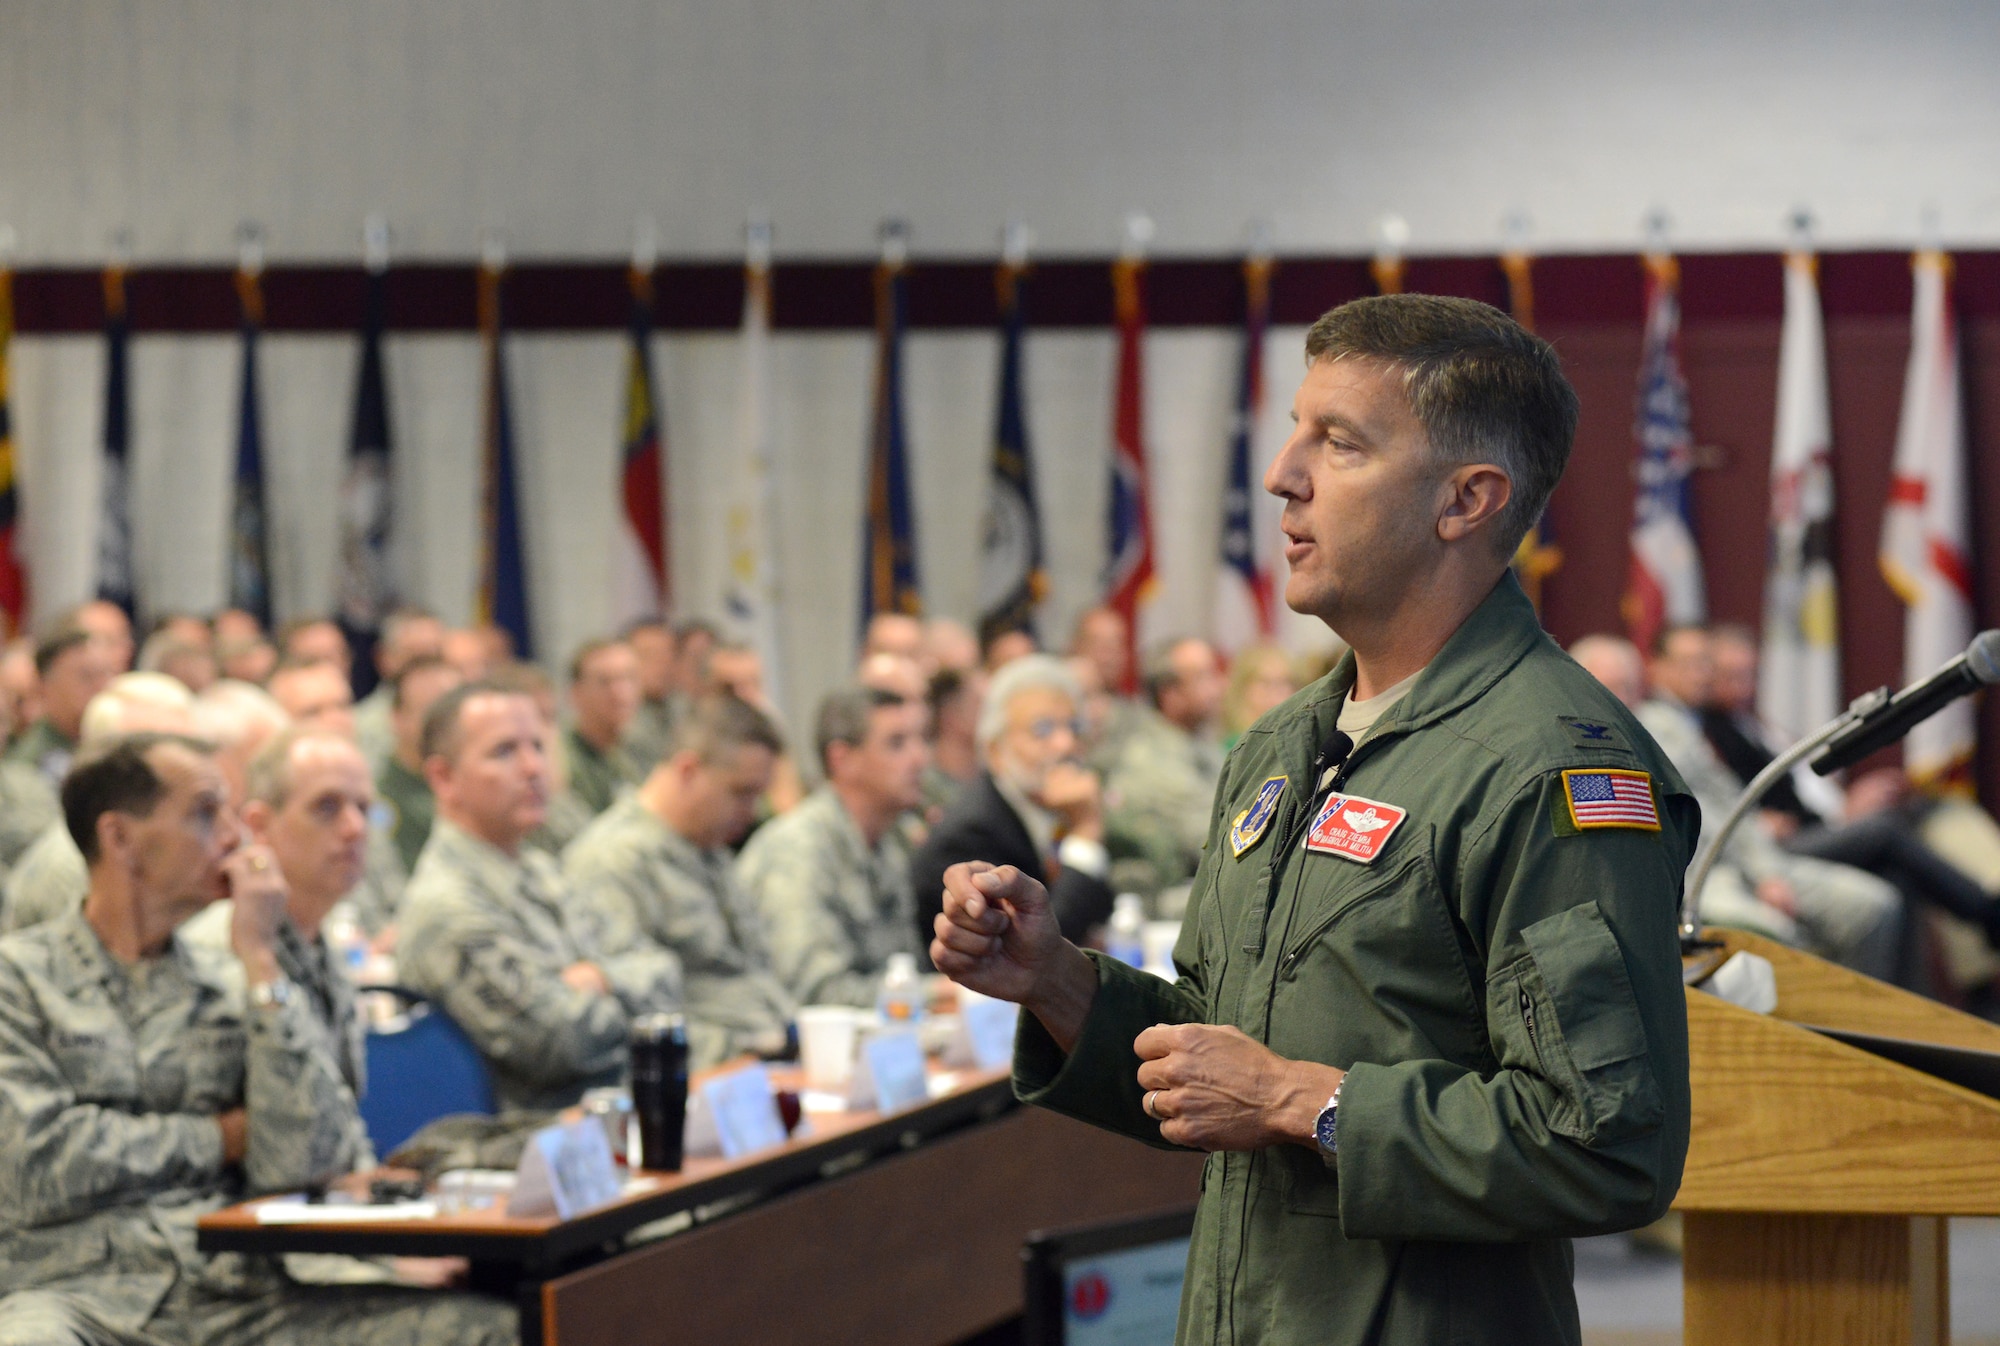 Col. Craig Ziemba, director of joint operations, Mississippi National Guard, discusses the Mississippi's manned intelligence, surveillance and reconnaissance program during the 2015 Air National Guard Executive Safety Summit at Volk Field Combat Readiness Training Center, Wisconsin, May 5, 2015. The conference covers a wide range of topics for ANG senior leaders including safety, resilience, mishap prevention and training. (US Air National Guard photo by Staff Sgt. John E. Hillier/RELEASED)